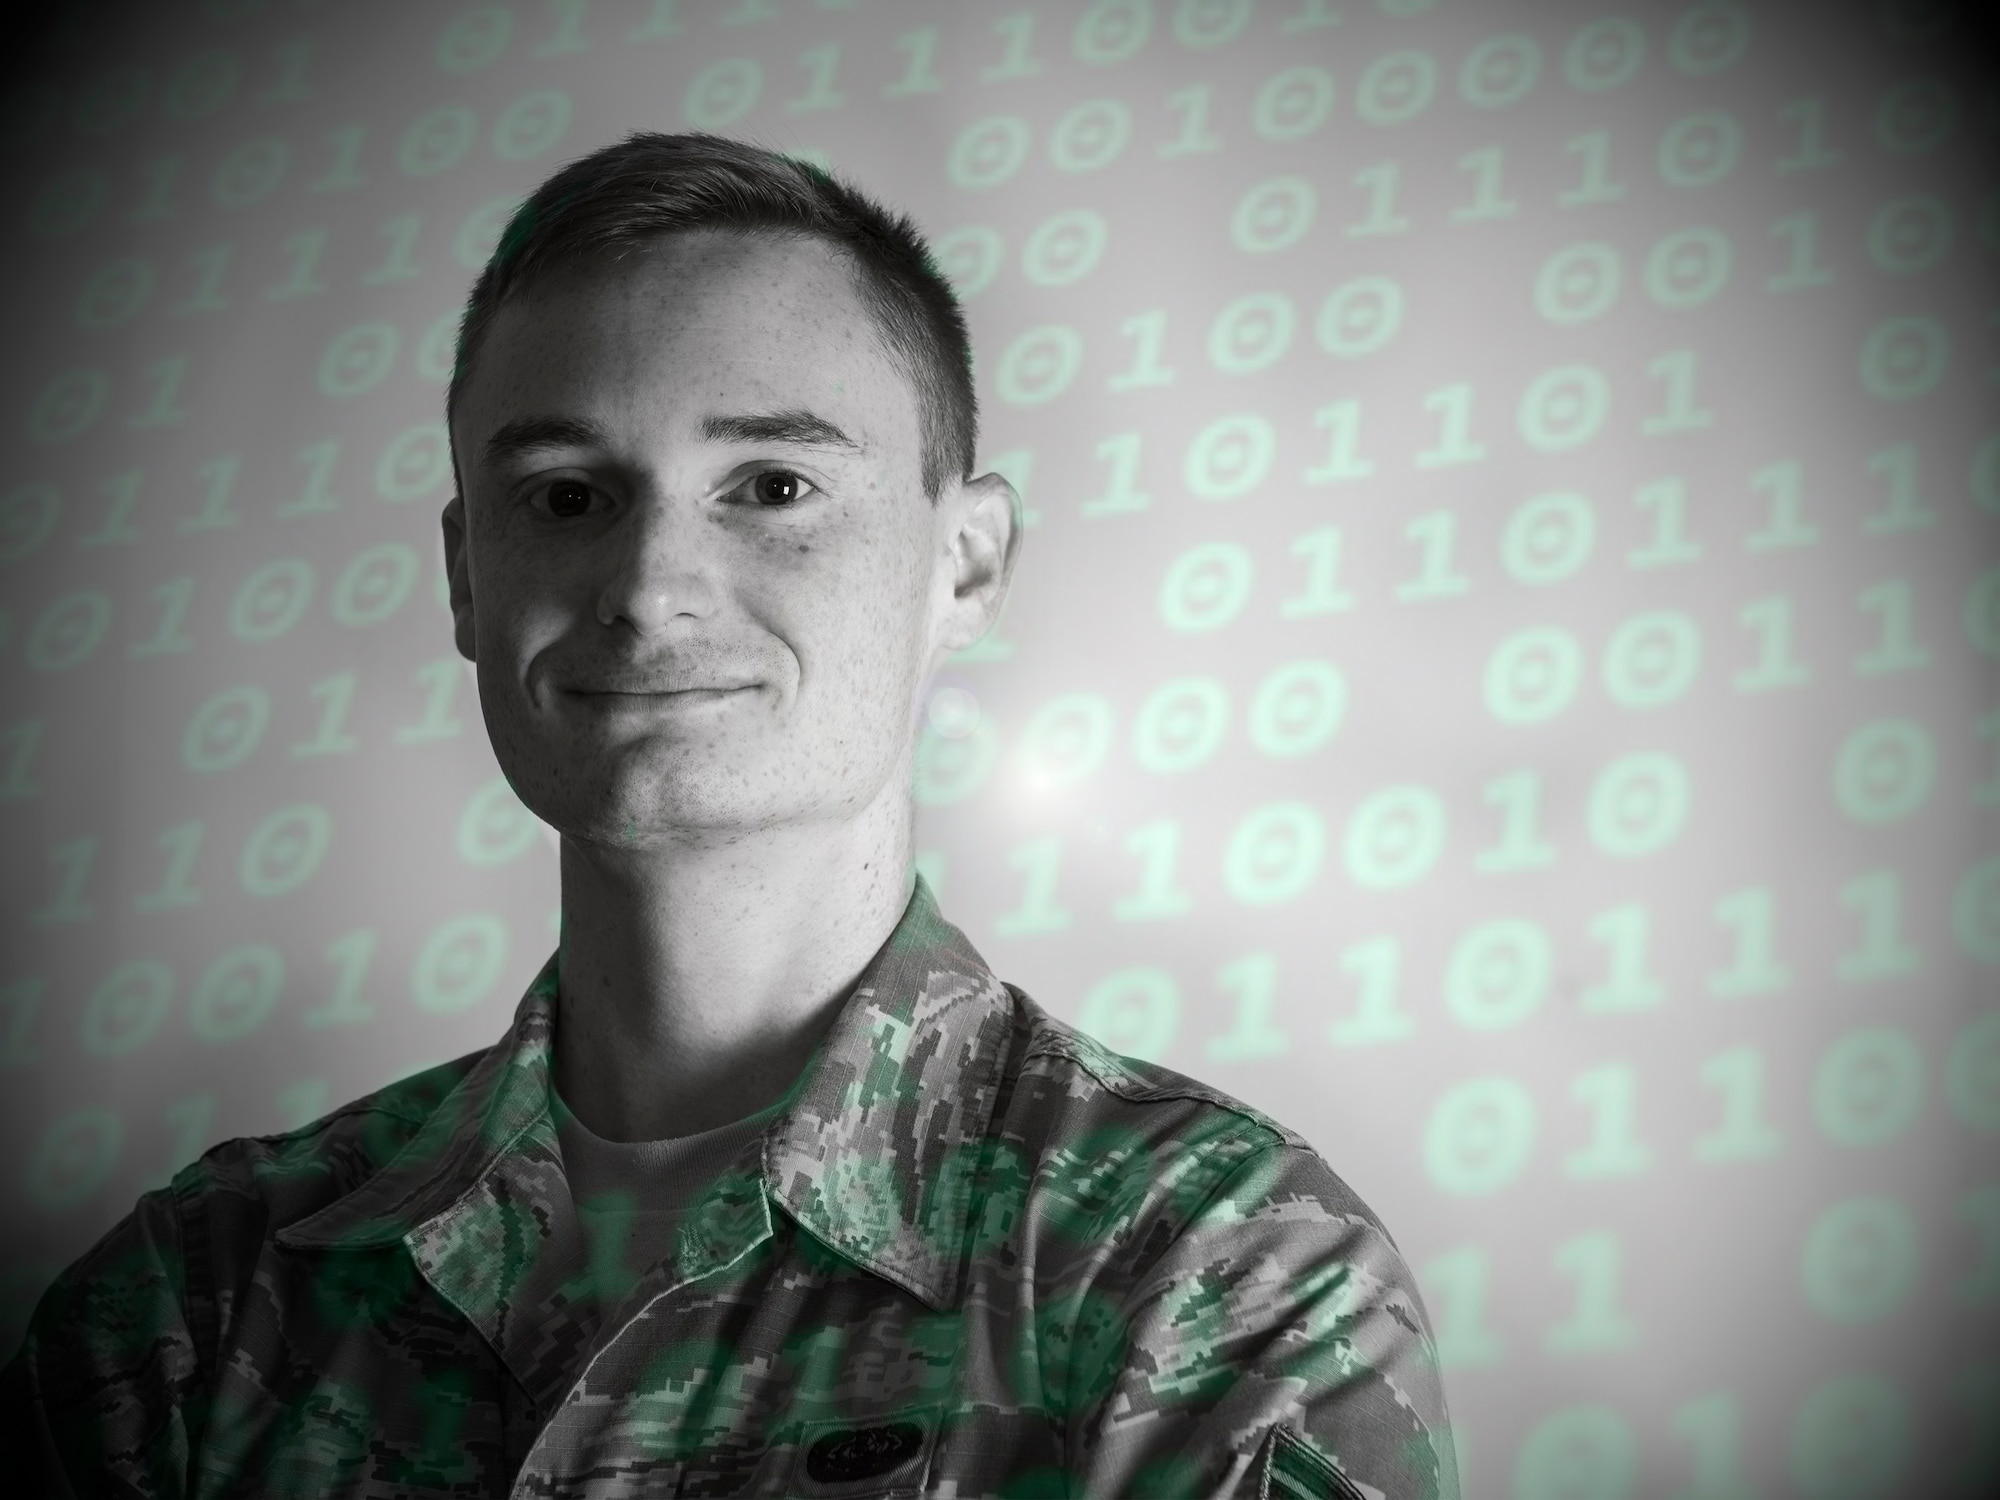 U.S. Air Force Senior Airman Dorian Stacy, 423rd Communications Squadron network operations technician, poses for a photo at RAF Alconbury, England, August 8, 2019. Stacy is in charge of securing network operations and ensuring proper access and permissions are in place at RAF Alconbury and RAF Molesworth. (U.S. Air Force illustration by Master Sgt. Brian Kimball)